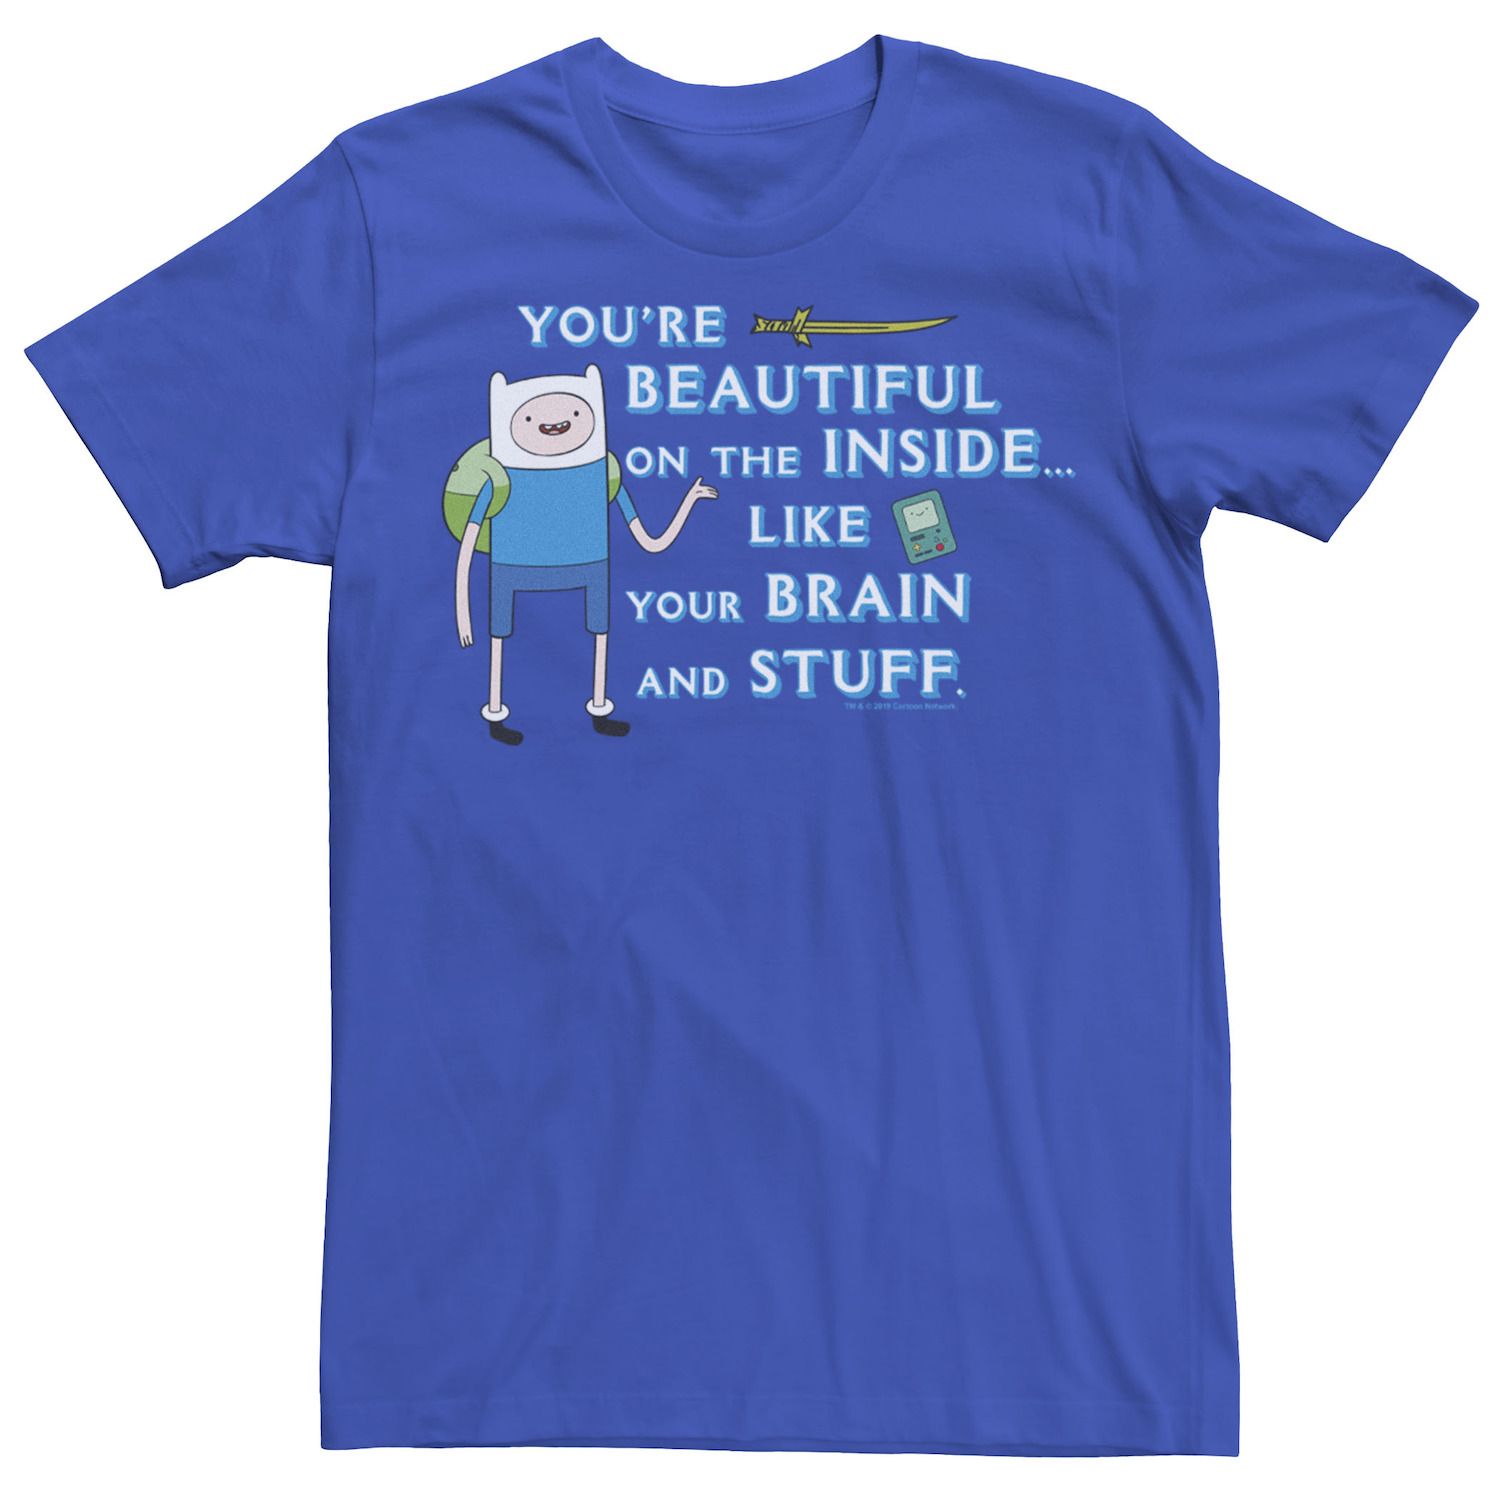 Image for Licensed Character Men's Cartoon Network Adventure Time Finn You're Beautiful Inside Portrait Tee at Kohl's.